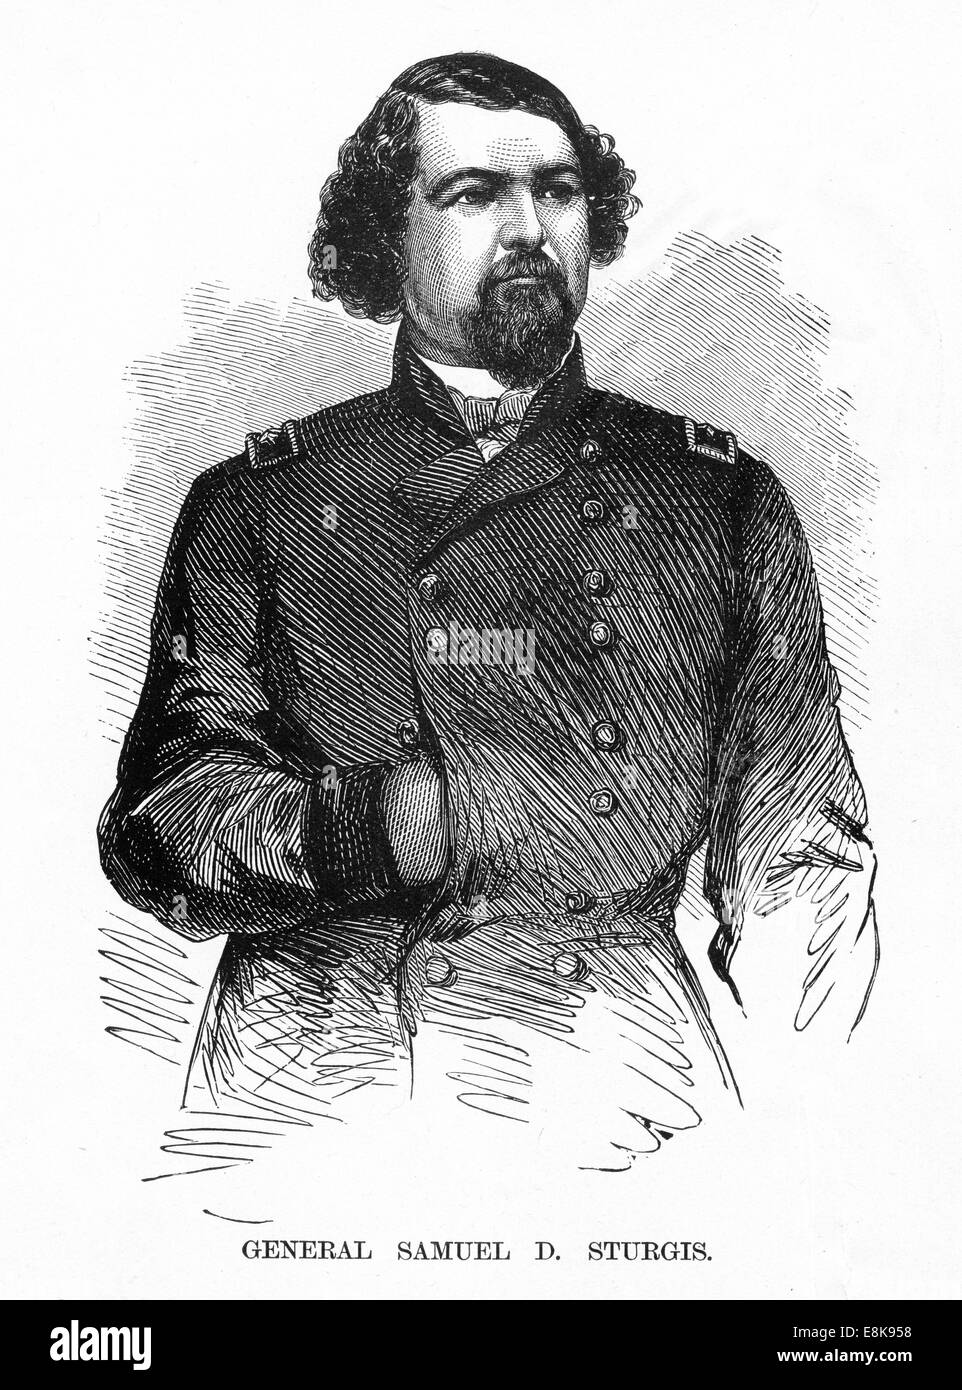 Engraving of General Samuel D. Sturgis from 'Famous Leaders and Battle Scenes of the Civil War,' Published in 1864. Stock Photo